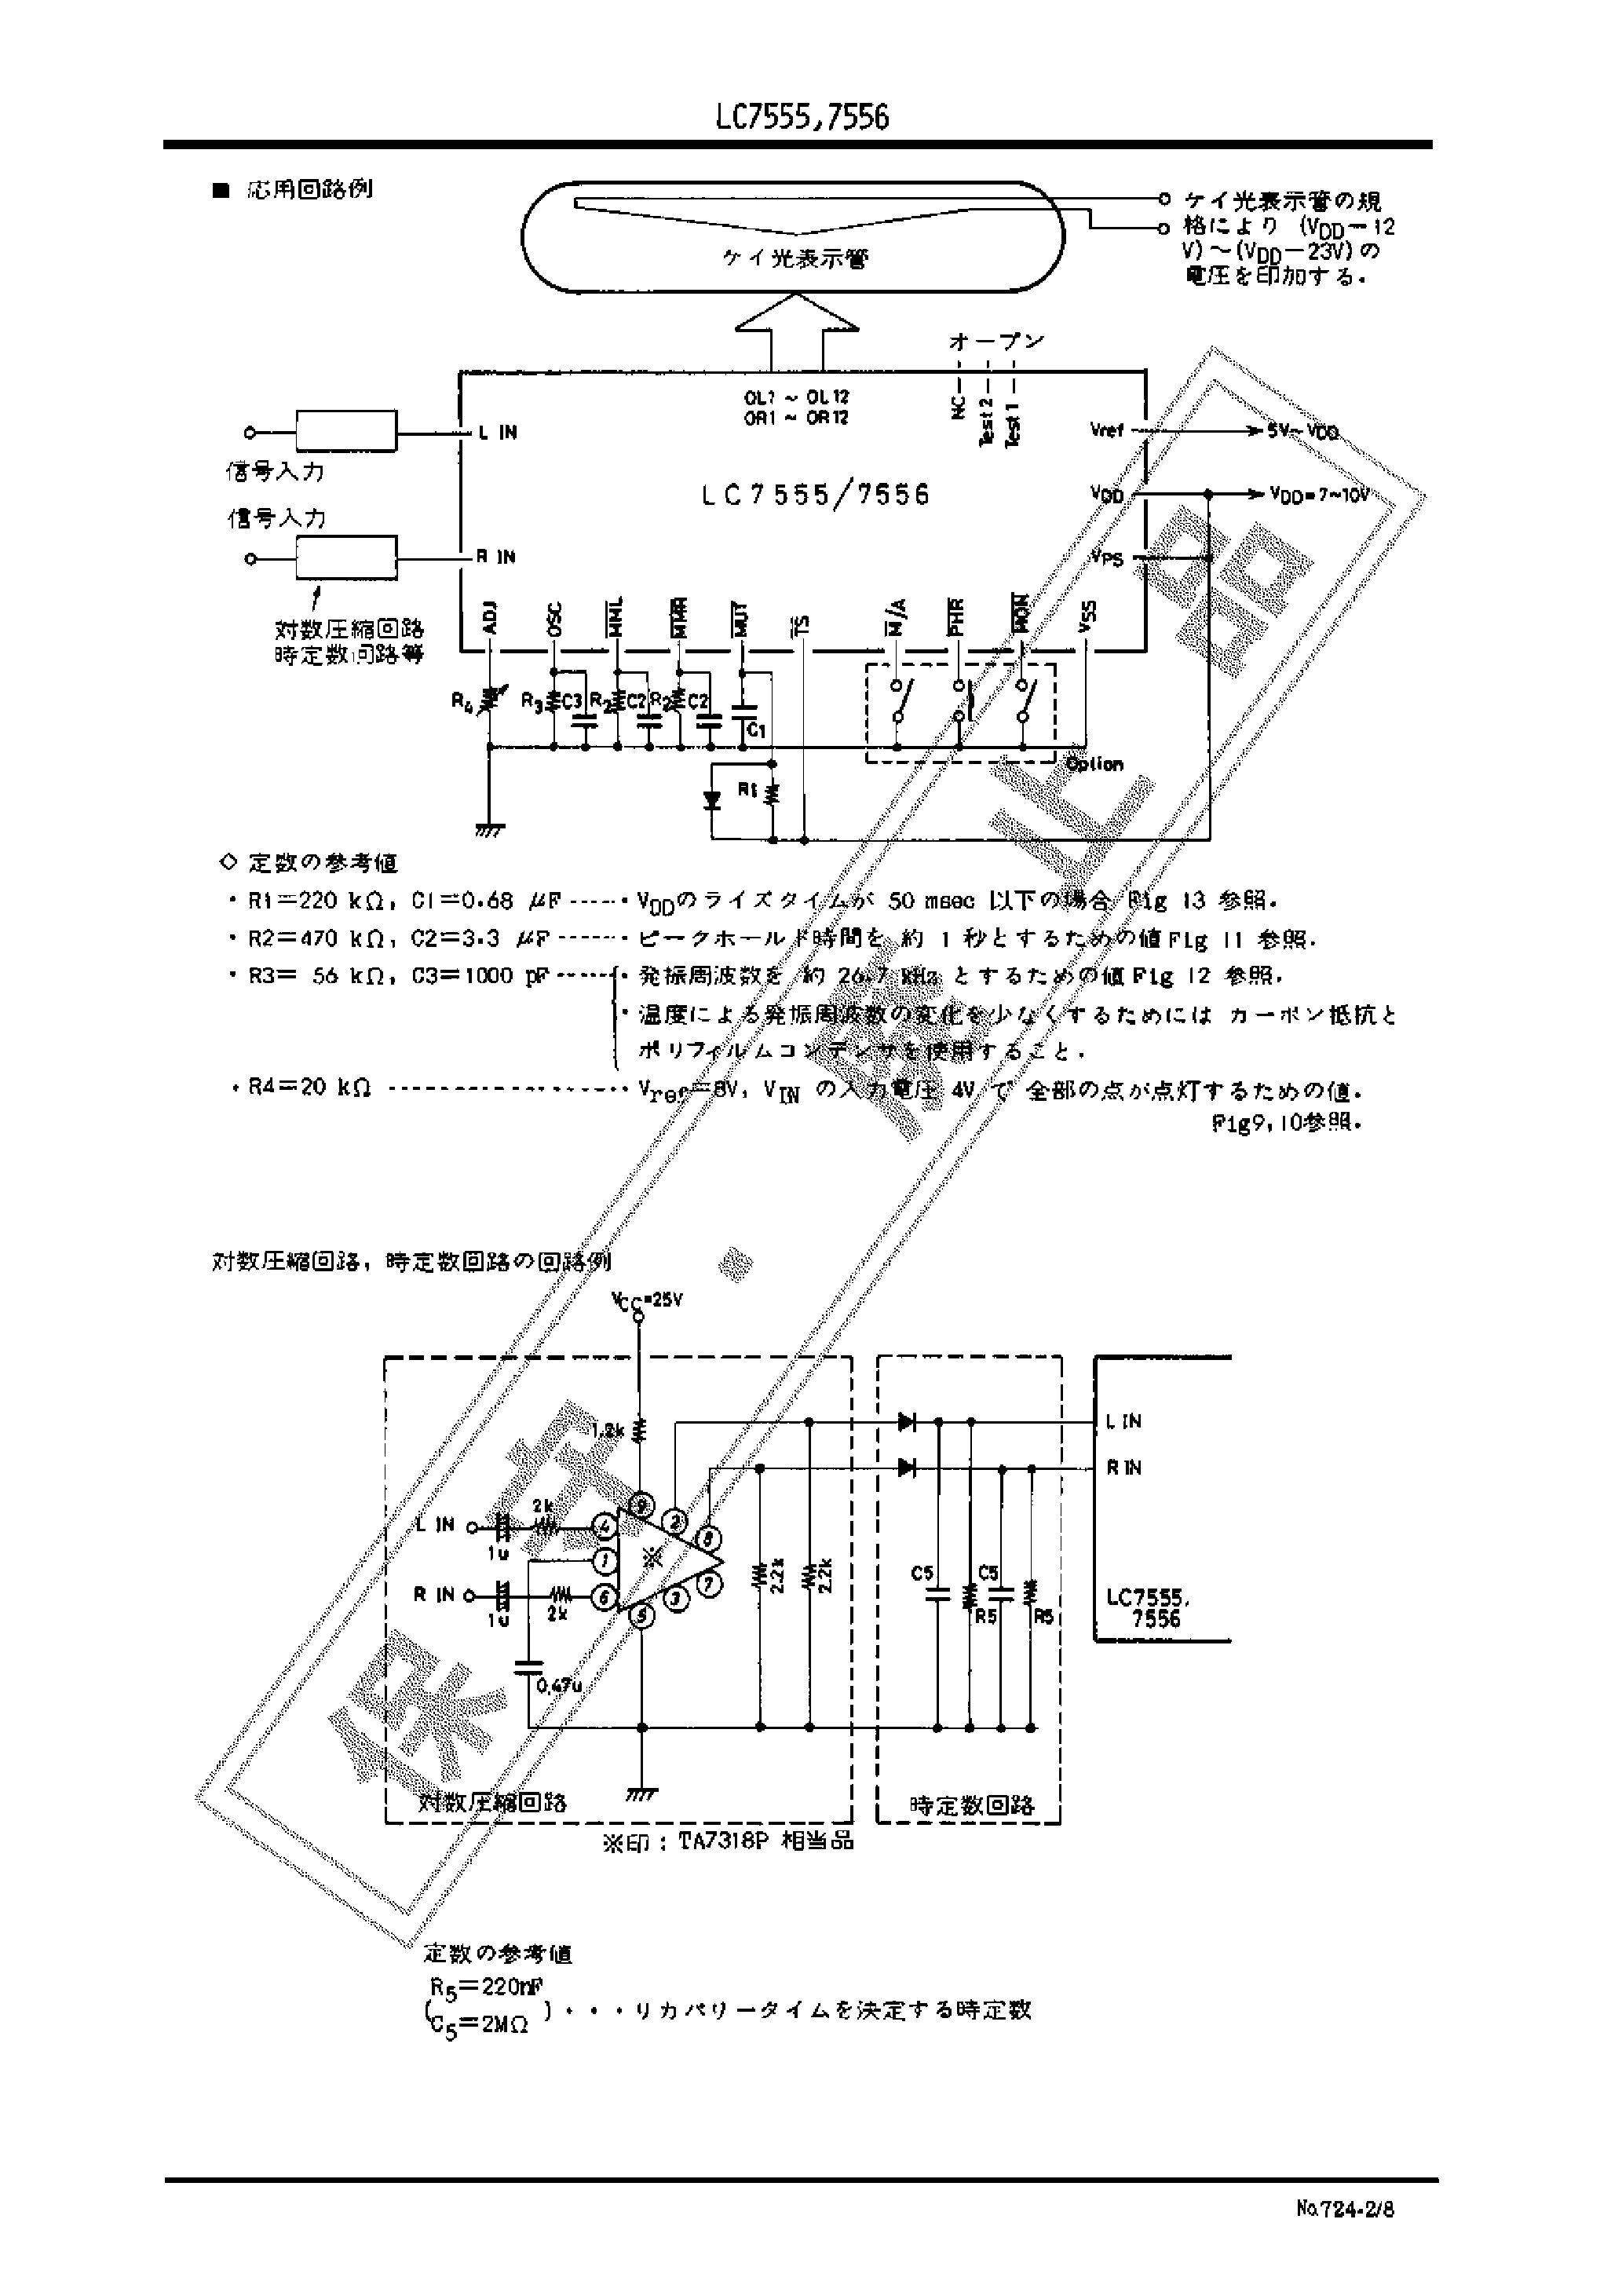 Datasheet LC7555 - (LC7555 / LC7556) CMOS LSI page 2